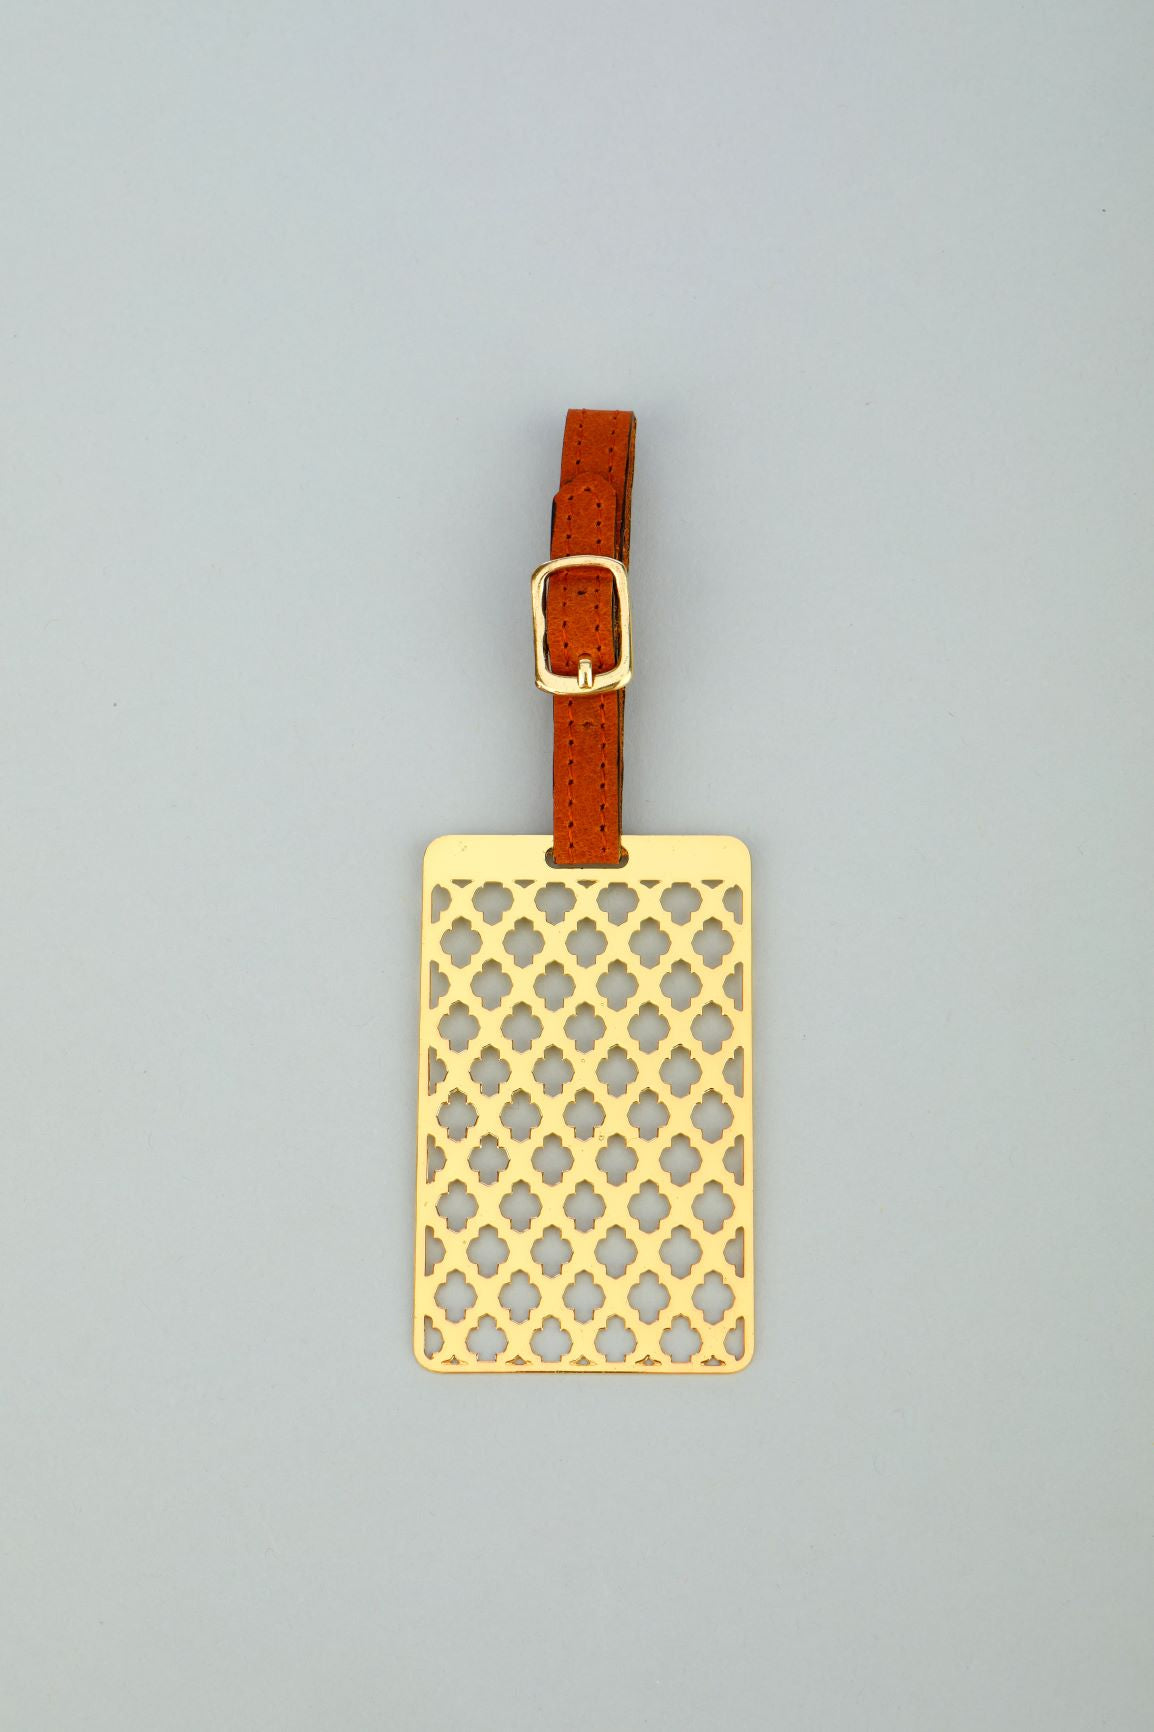 Adoraa's Noor Collection Floral Design Brass Luggage Tag